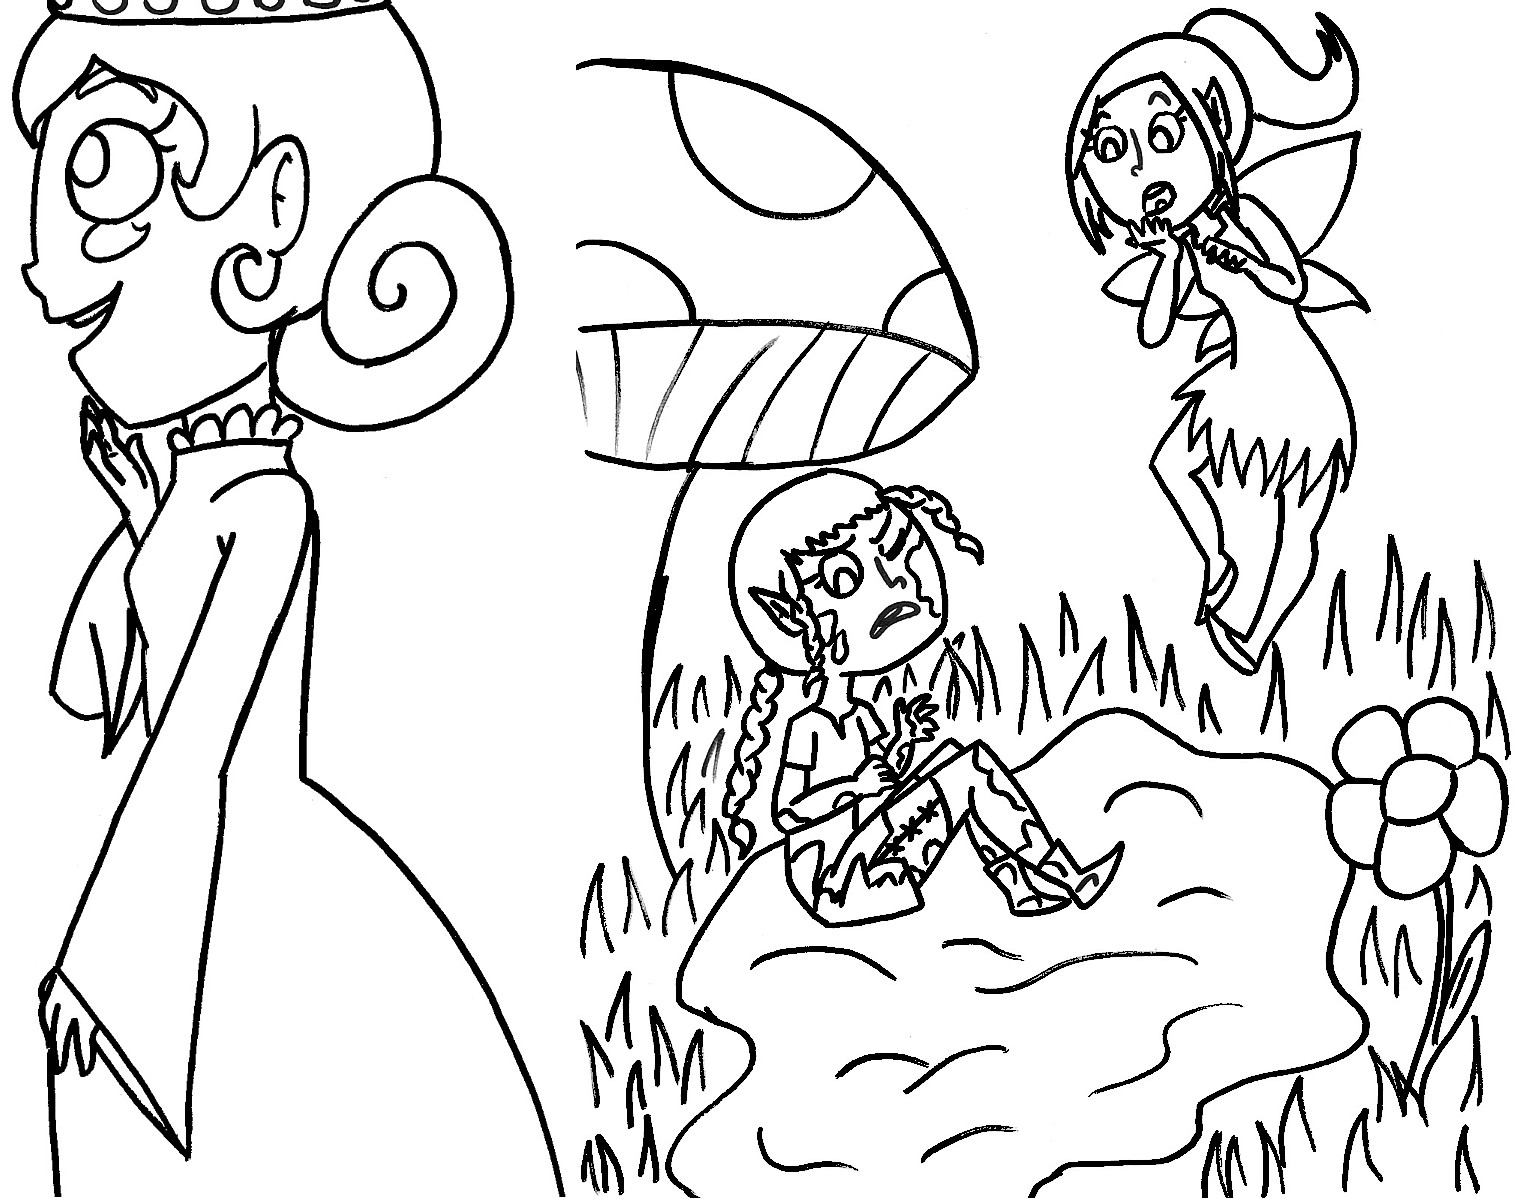 Coloring Book Pages 3 and 4 by MsMayfair on DeviantArt